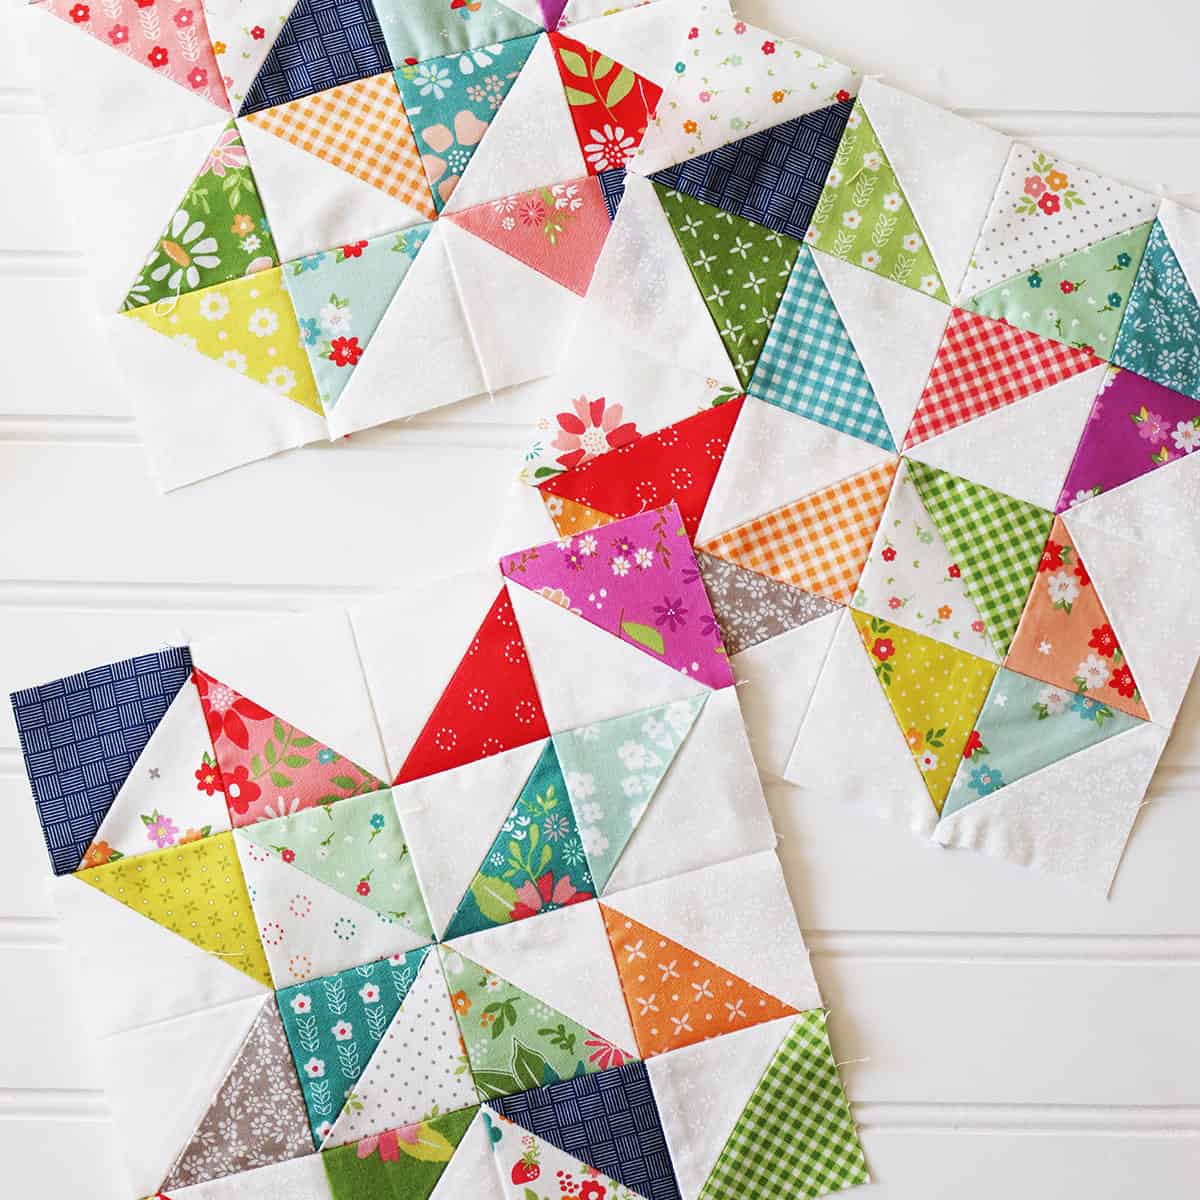 Scrappy half-square triangle blocks by Sherri from A Quilting Life